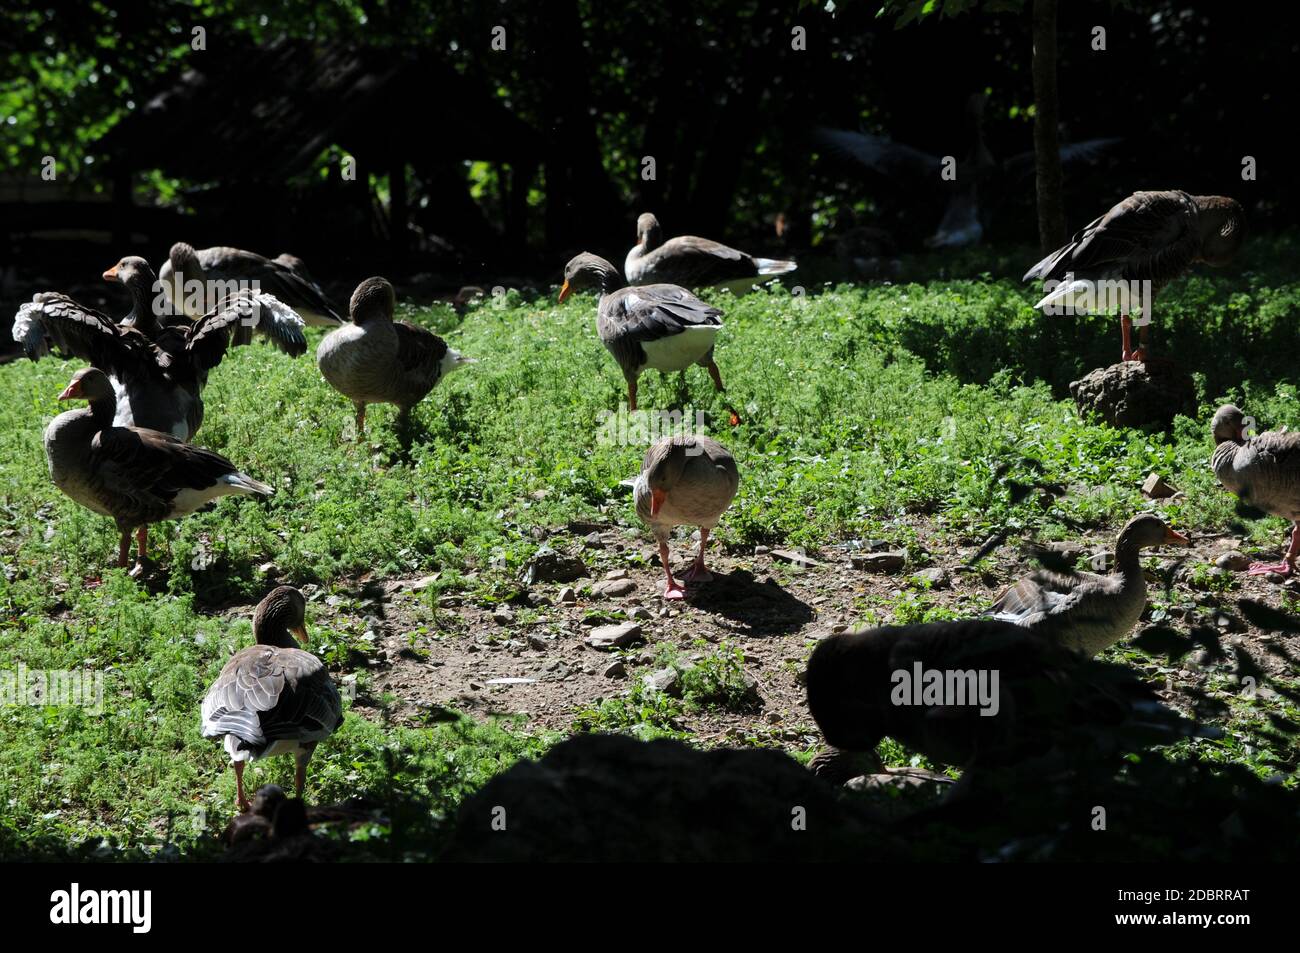 Group of goslings in a naturalist oasis Stock Photo